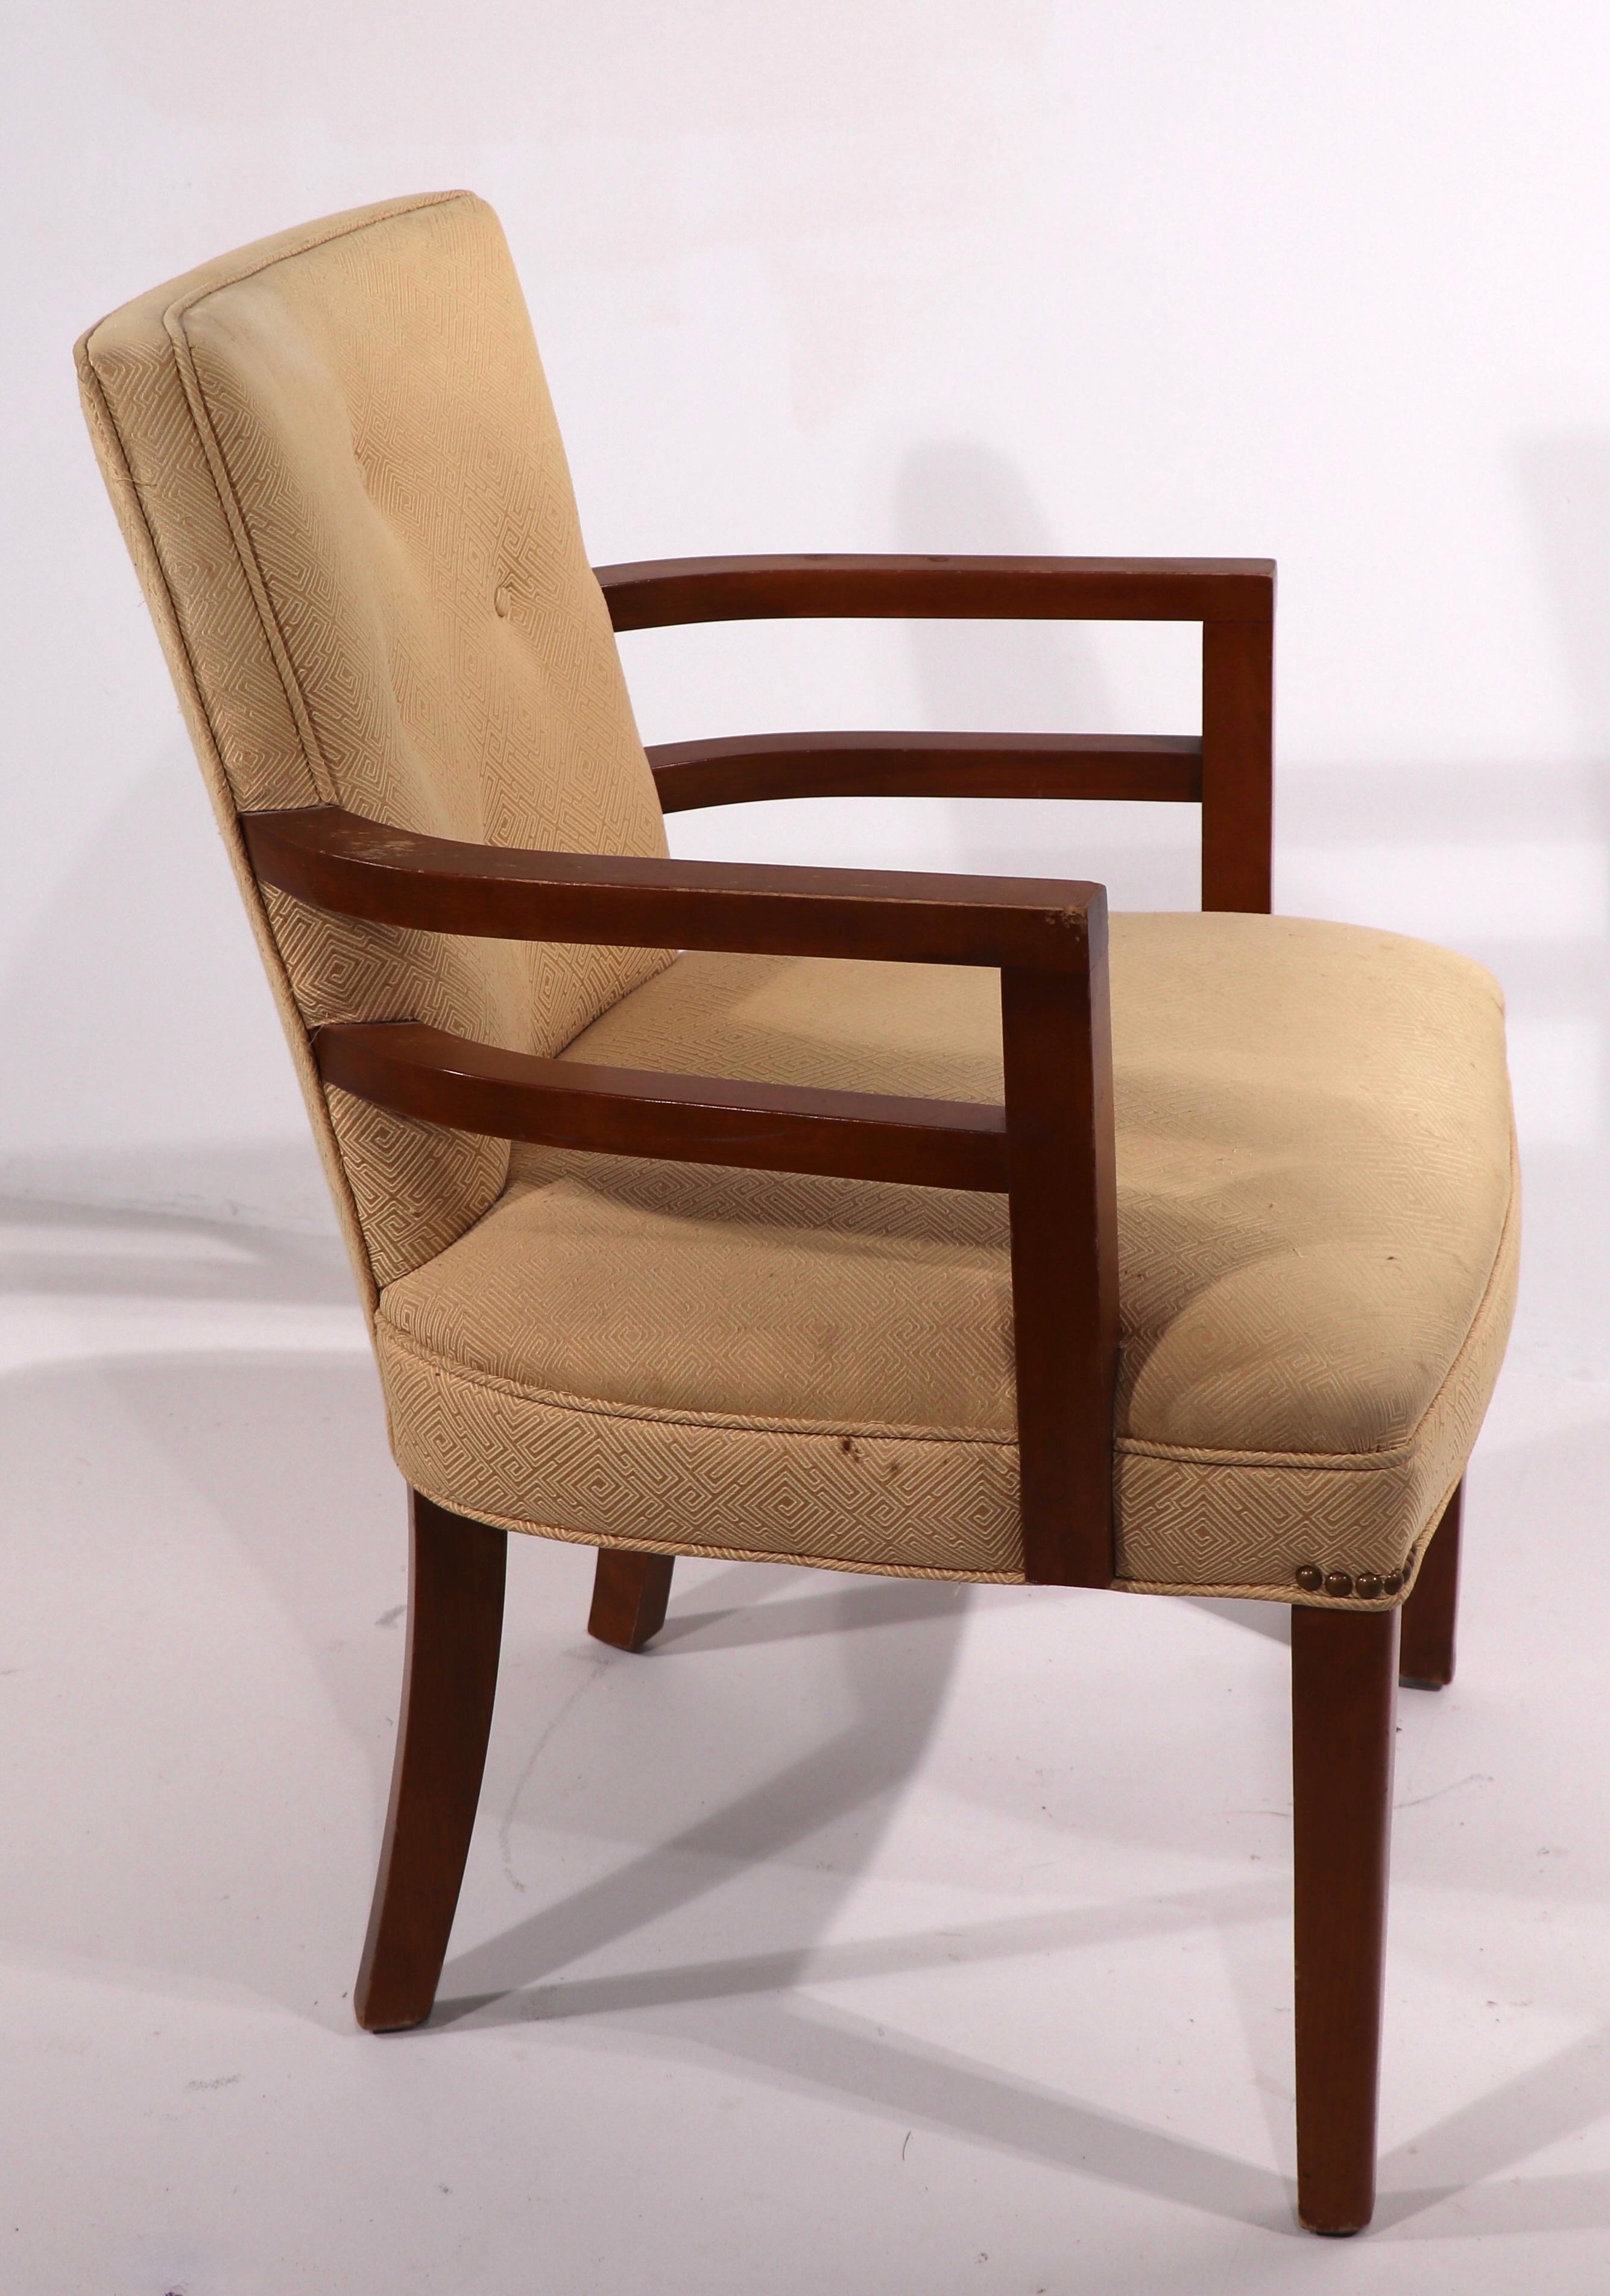 Machine Age Art Deco Arm Chair in the Style of Gilbert Rohde In Good Condition For Sale In New York, NY